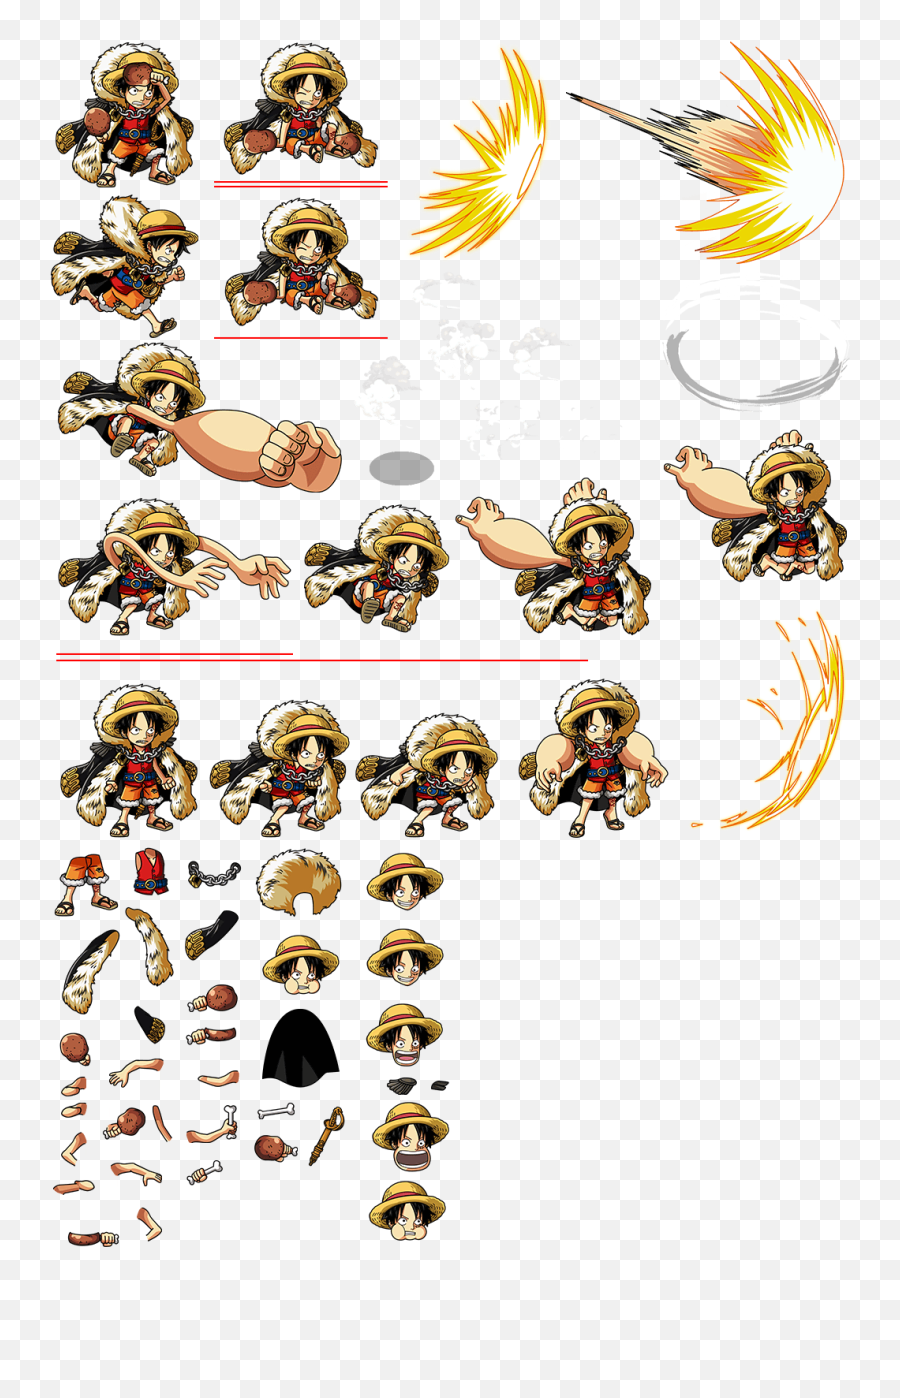 Mobile - One Piece Treasure Cruise 0578 Monkey D Luffy Sprite Sheet Png,Monkey D Luffy Icon